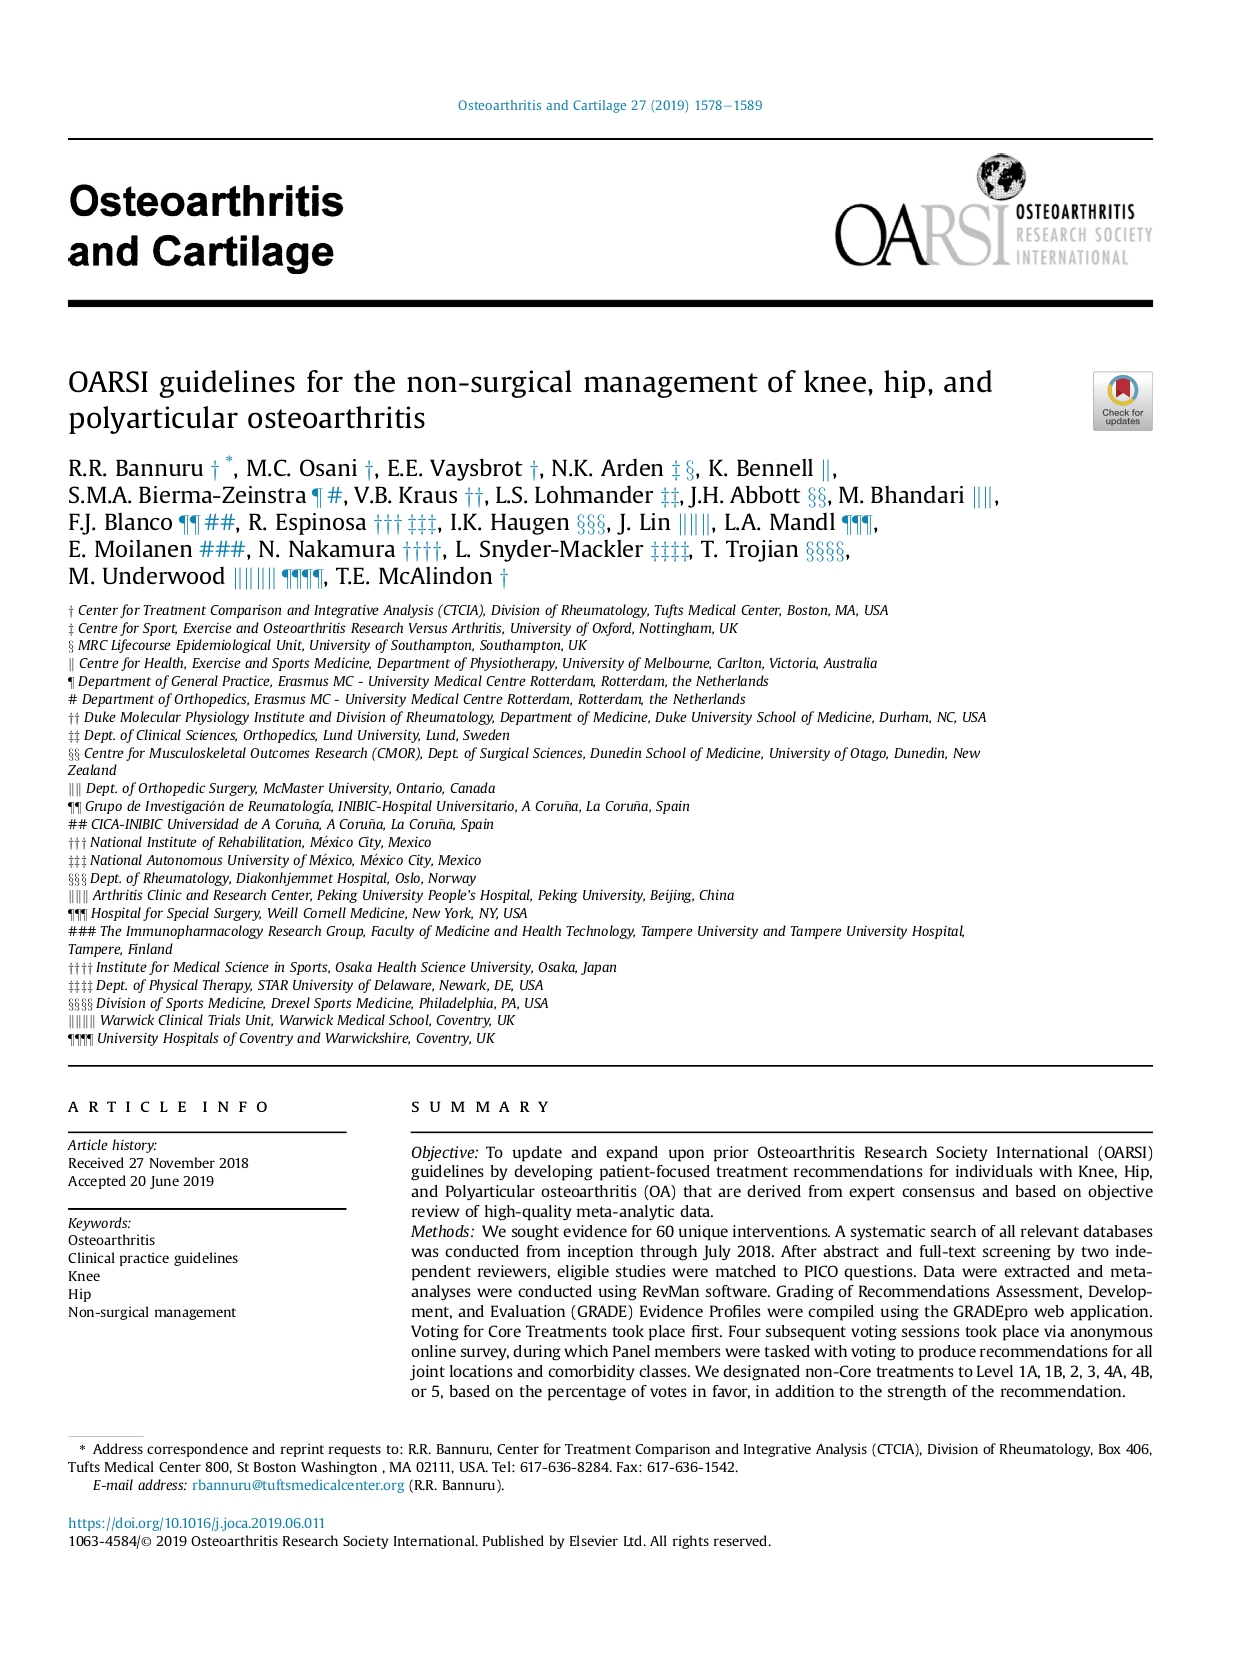 2019, OARSI guidelines for the non-surgical management of knee, hip, and polyarticular osteoarthritis (OARSI 2019)